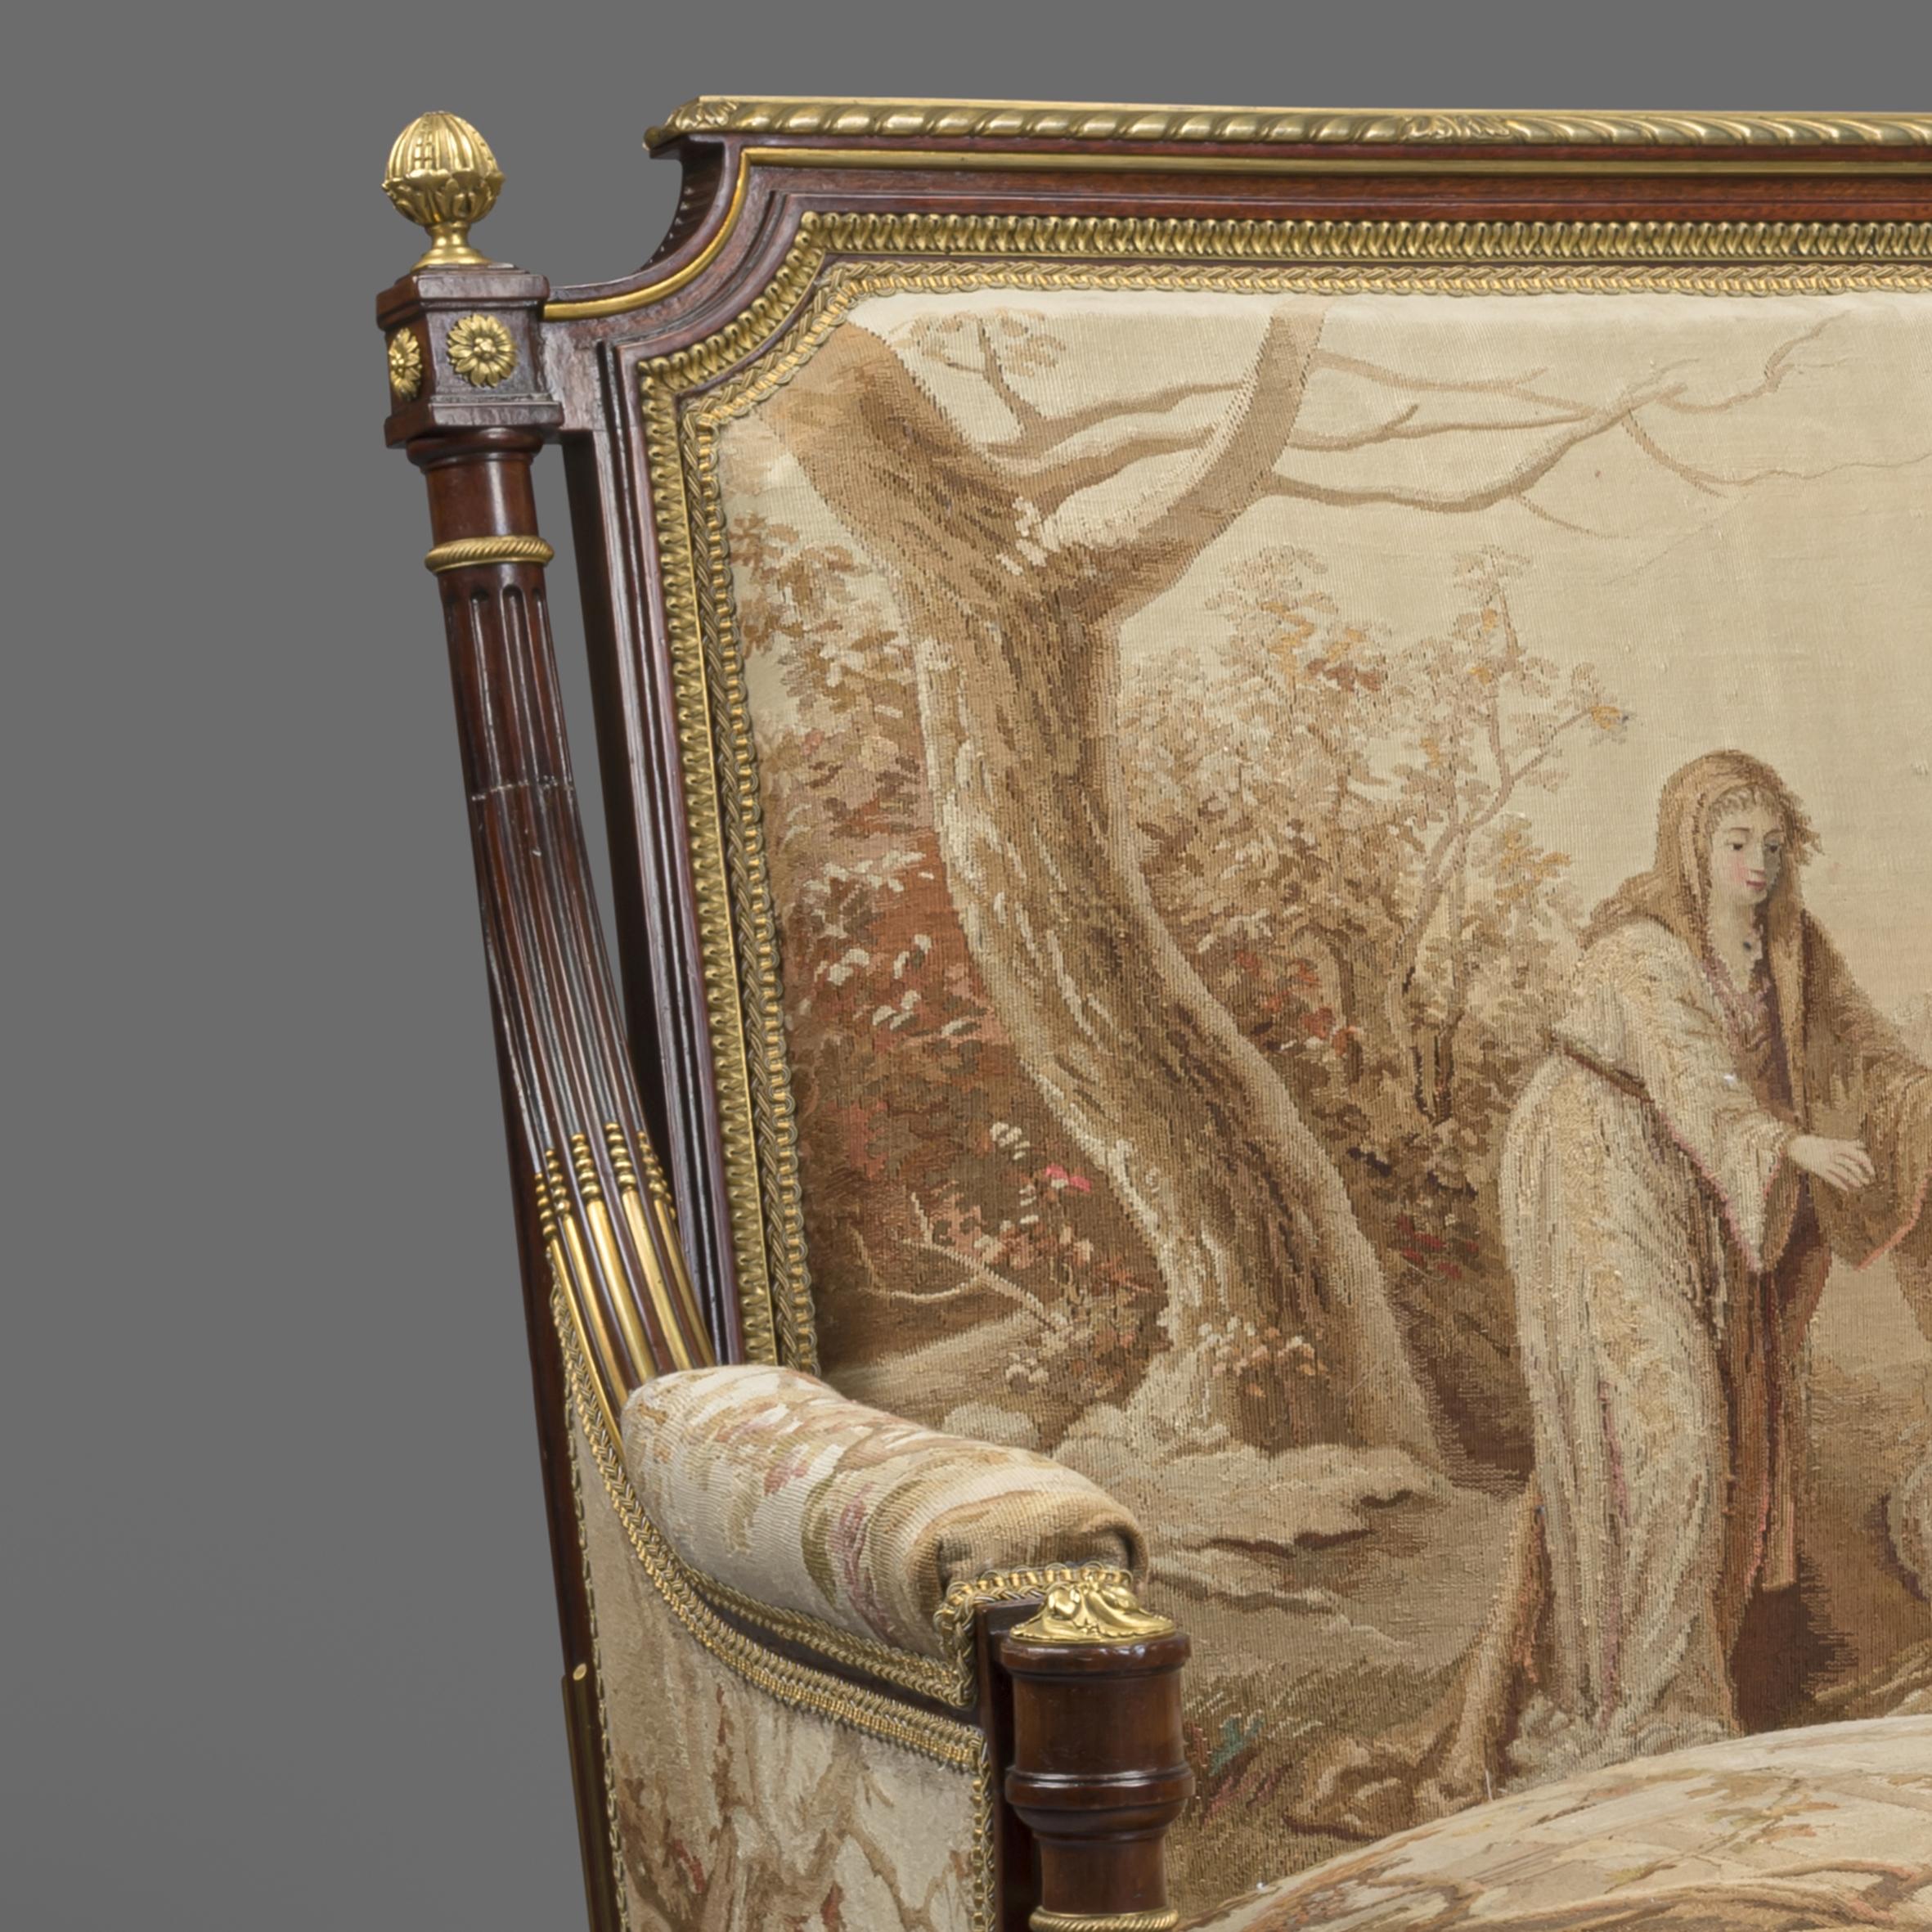 A fine pair of Louis XVI style gilt-bronze mounted mahogany and Aubusson tapestry upholstered bergeres.

This fine pair of mahogany bergeres each have a gilt bronze top rail above a rectangular back flanked by reeded columns and arms, upholstered